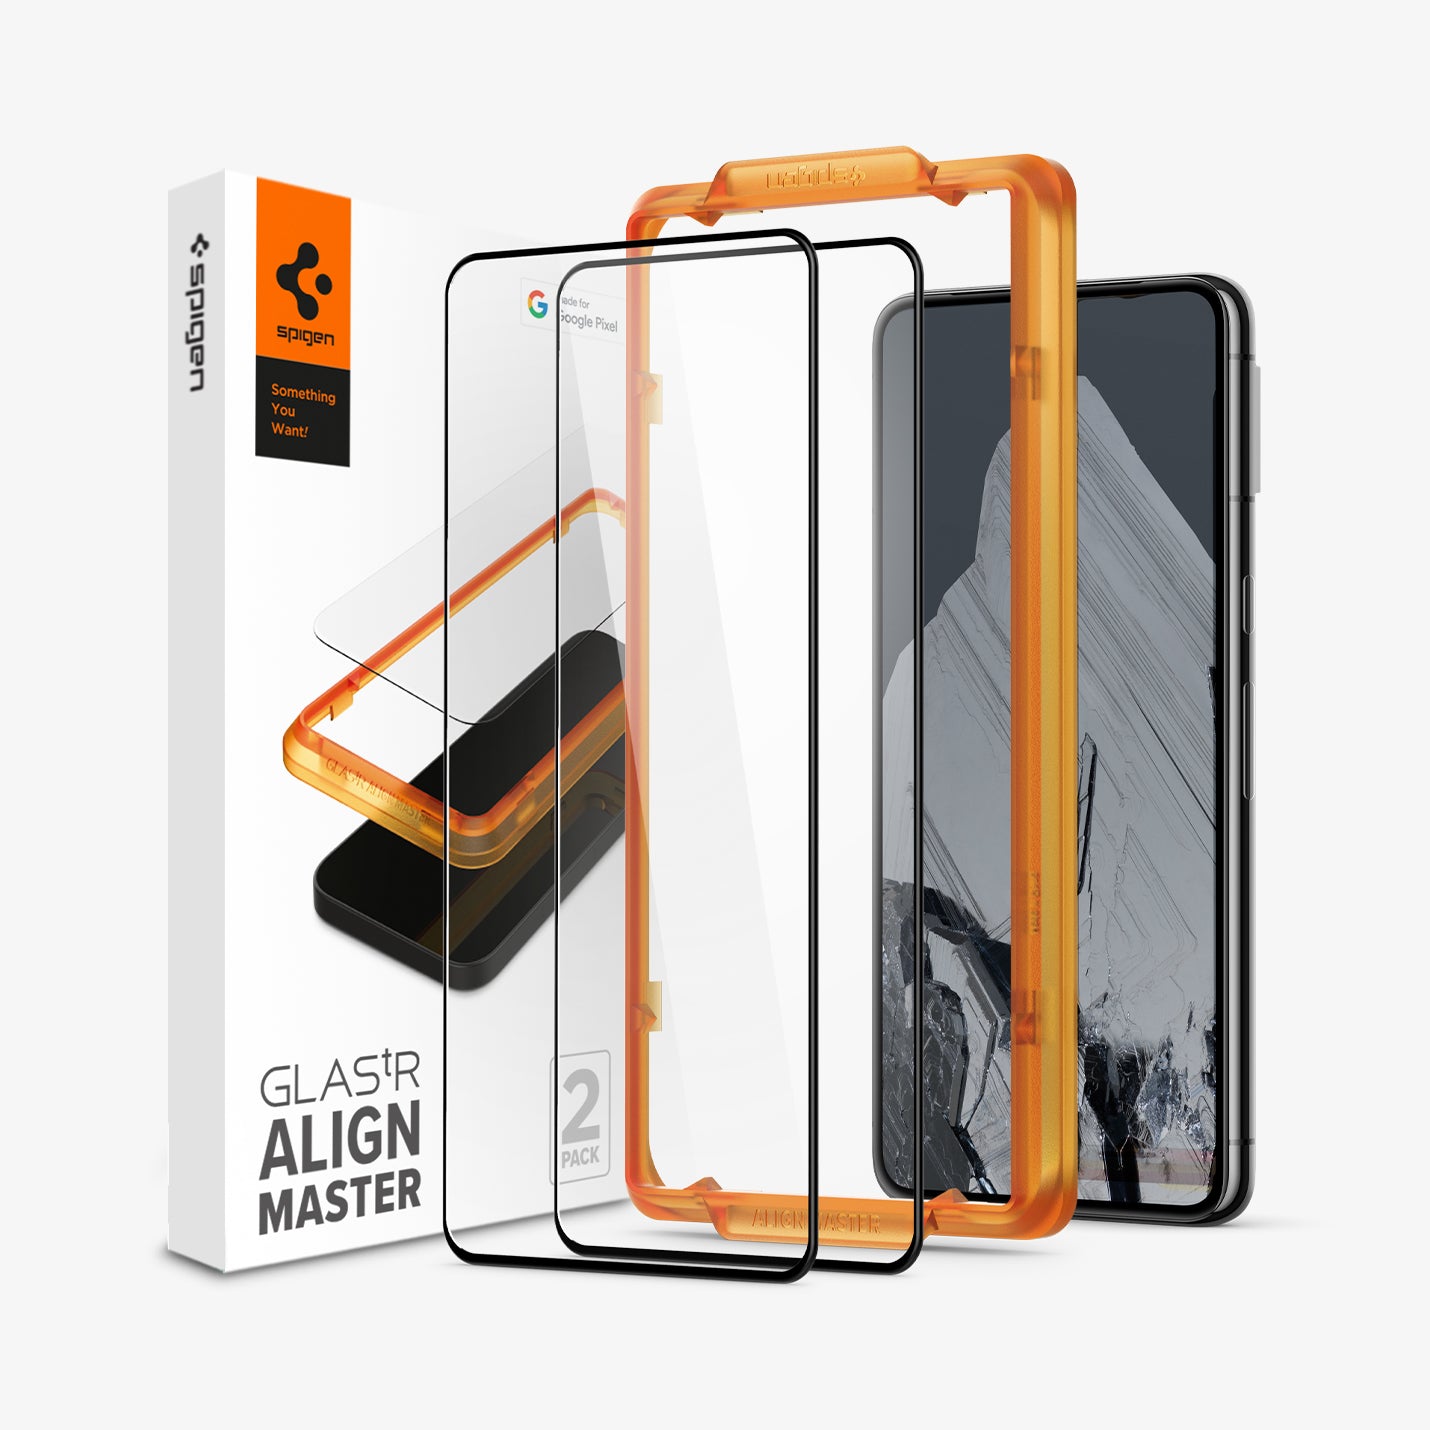 AGL06353 - Pixel 8 Pro Alignmaster Screen Protector showing the device, two screen protectors, alignment tray and packaging